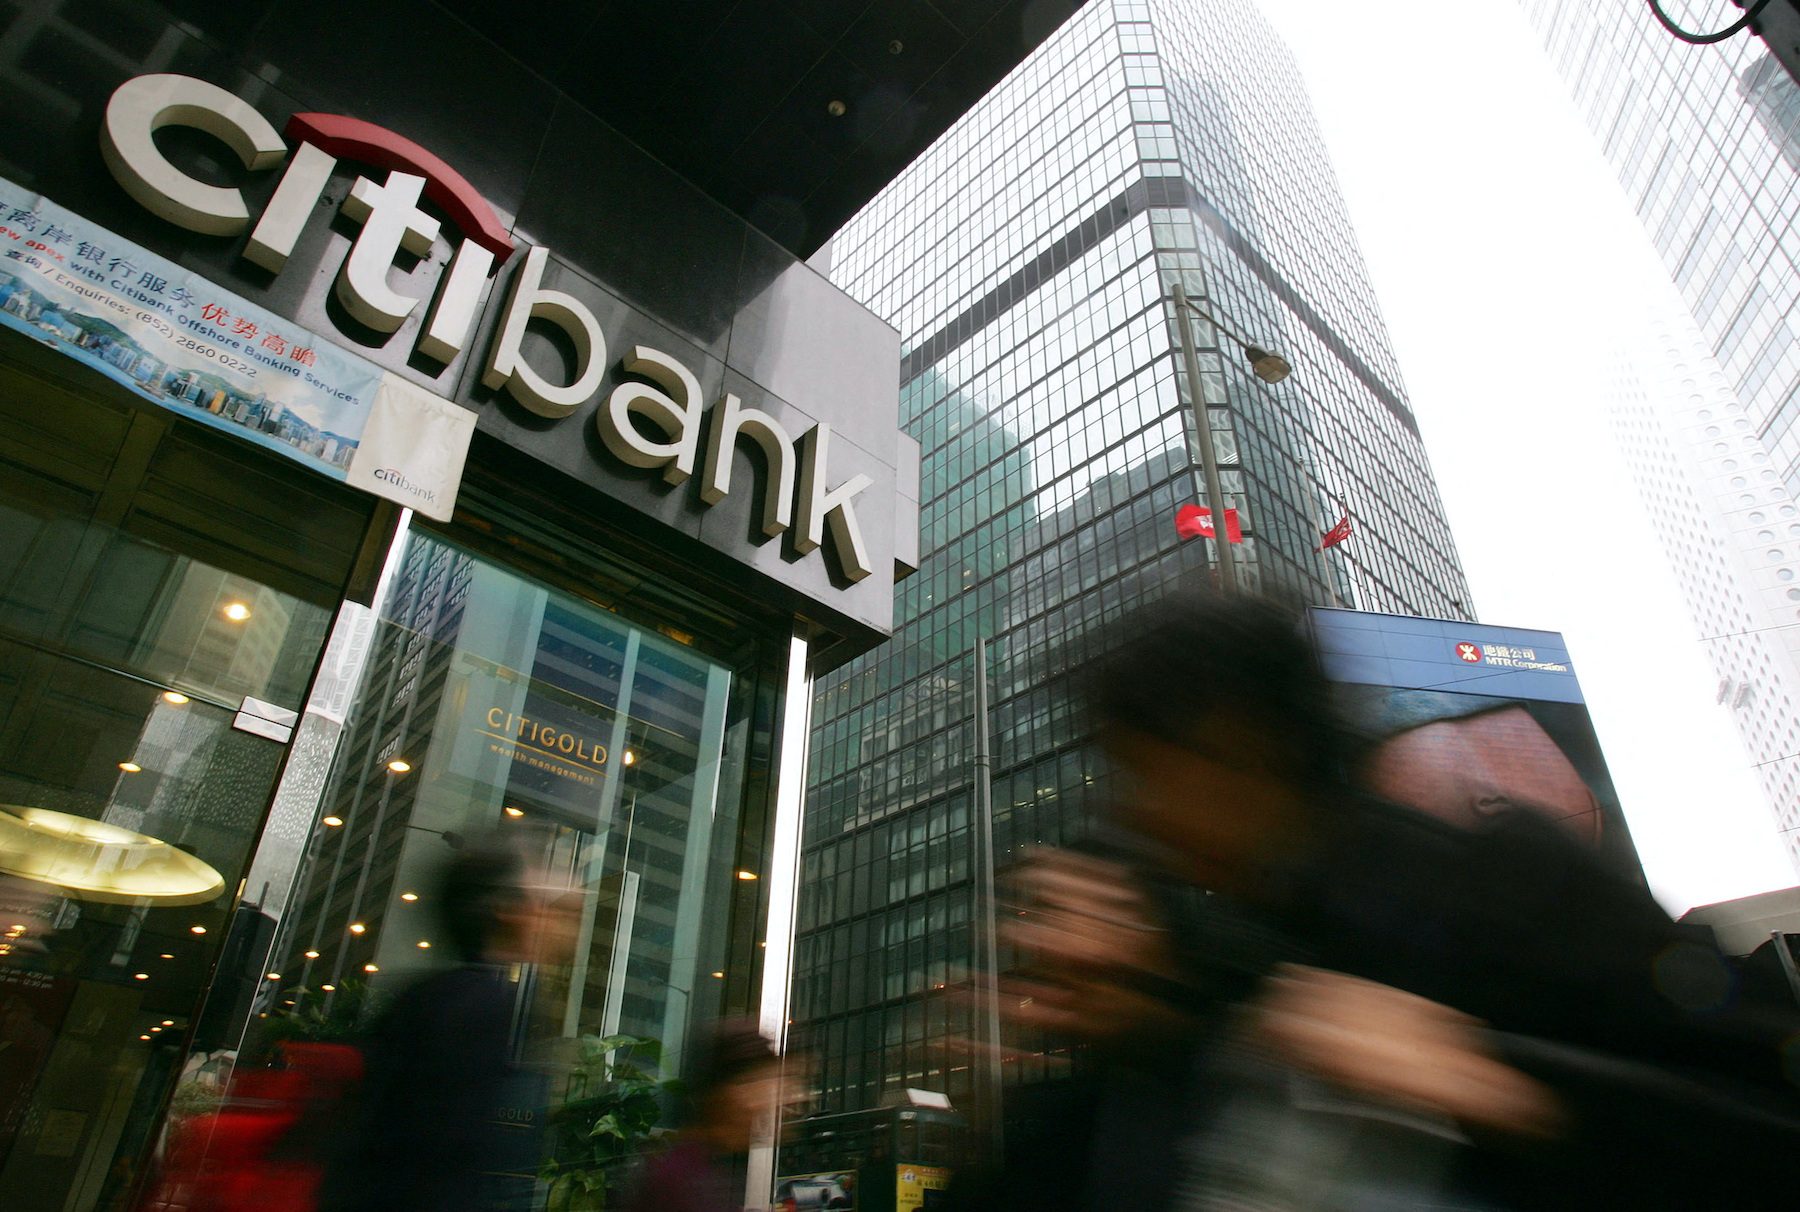 Citi, Raiffeisen, other foreign banks seek staff in Russia as they struggle to exit